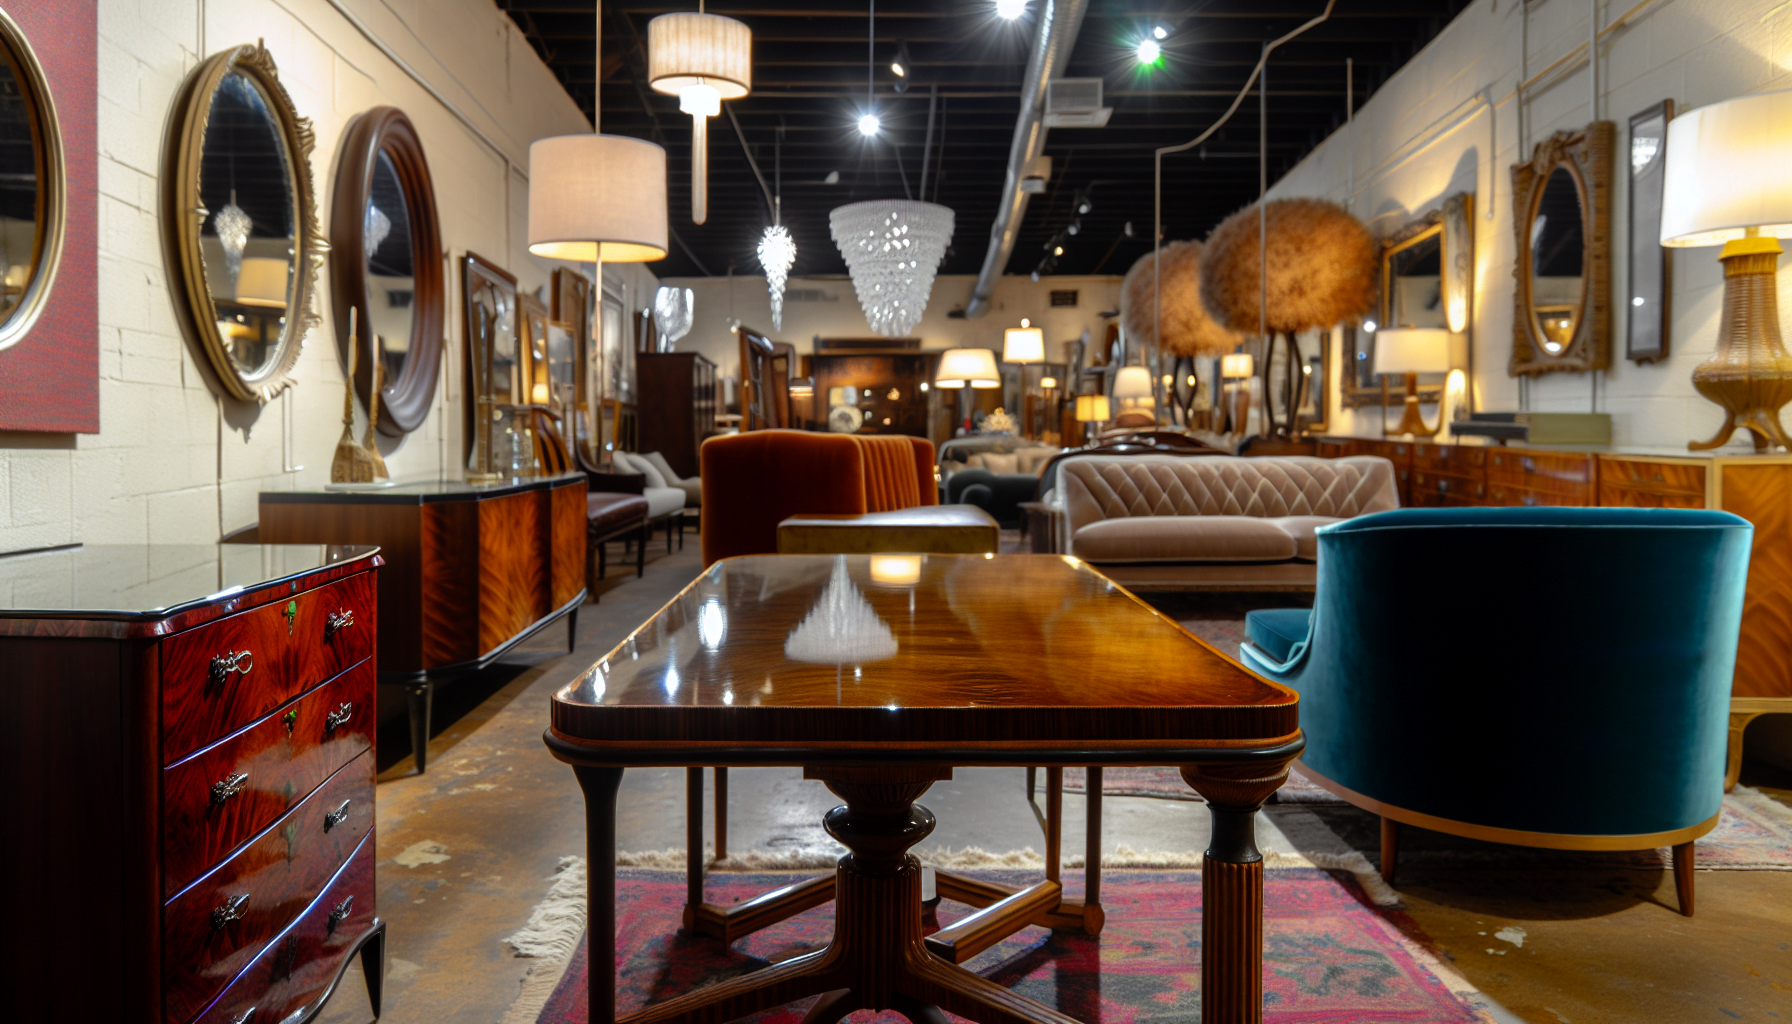 Interior of a high-end furniture consignment shop